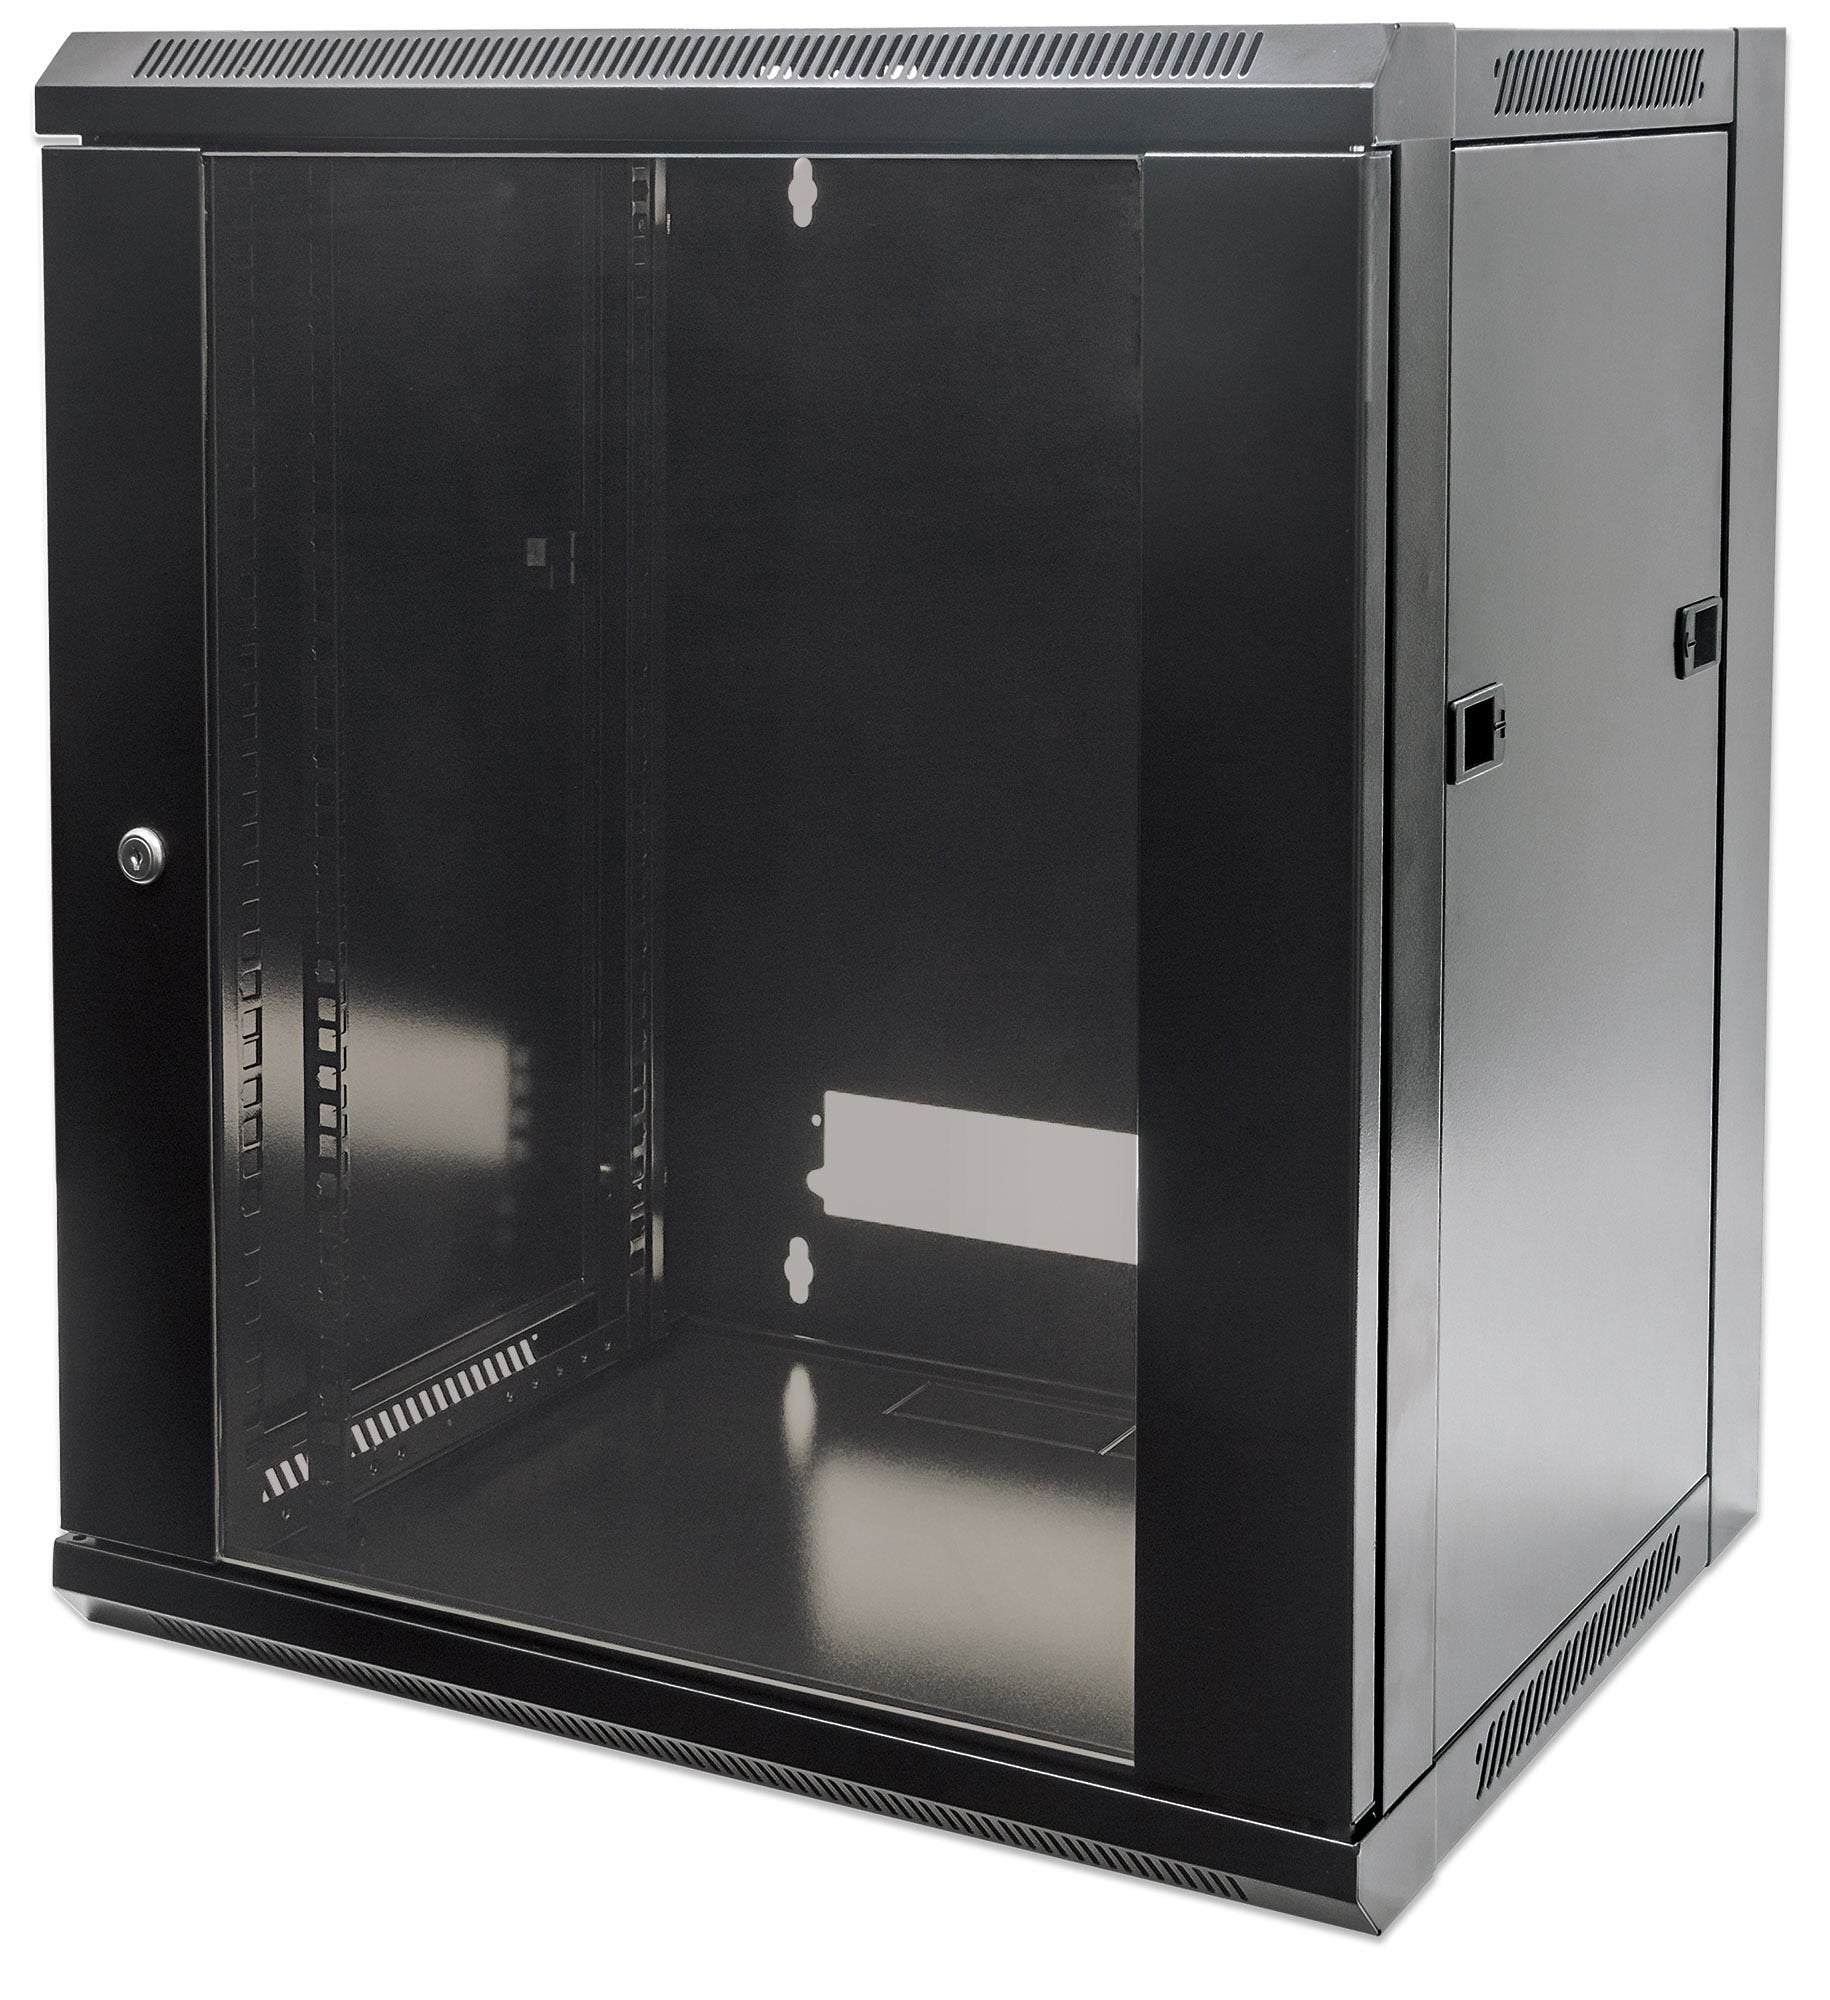 Intellinet Network Cabinet, Wall Mount (Standard), 9U, Usable Depth 260mm/Width 510mm, Black, Flatpack, Max 60kg, 19", Metal & Glass Door, Back Panel, Removeable Sides,Suitable also for use on desk or floor,19",Parts for wall install (eg screws/rawl plugs